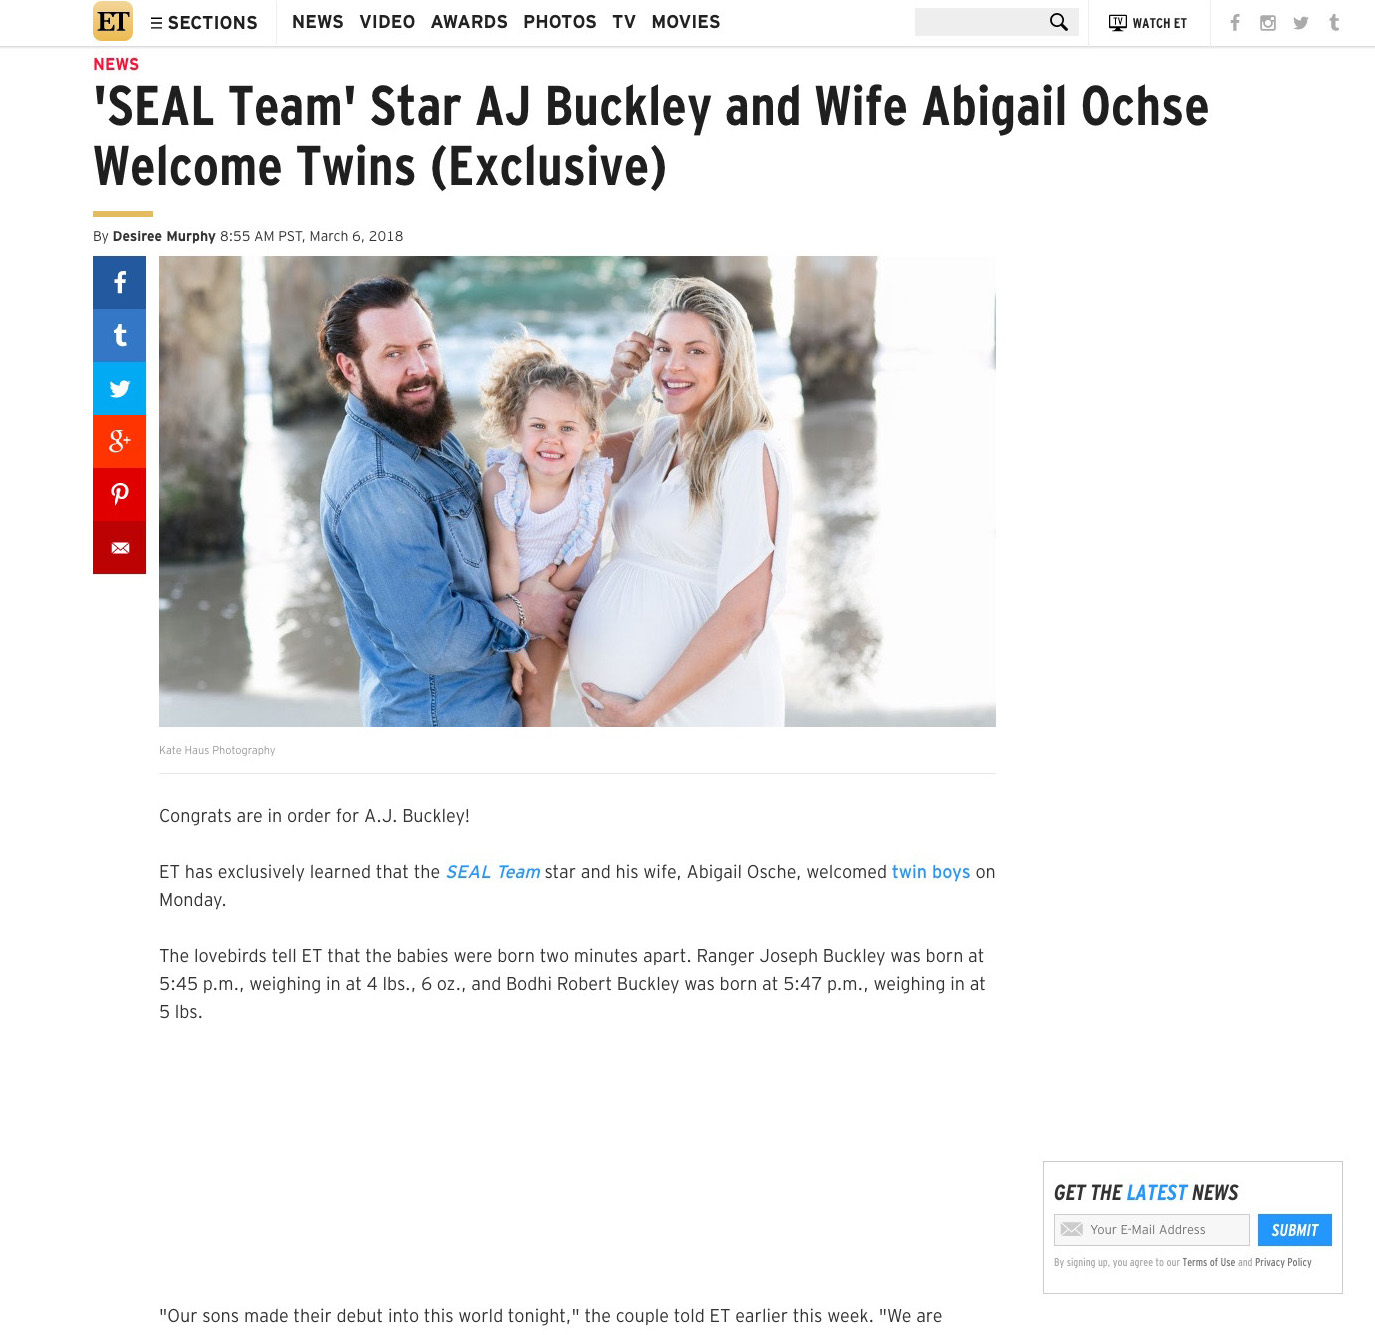 Entertainment Tonight: SEAL Team Star AJ Buckley and Wife Welcome Twins!